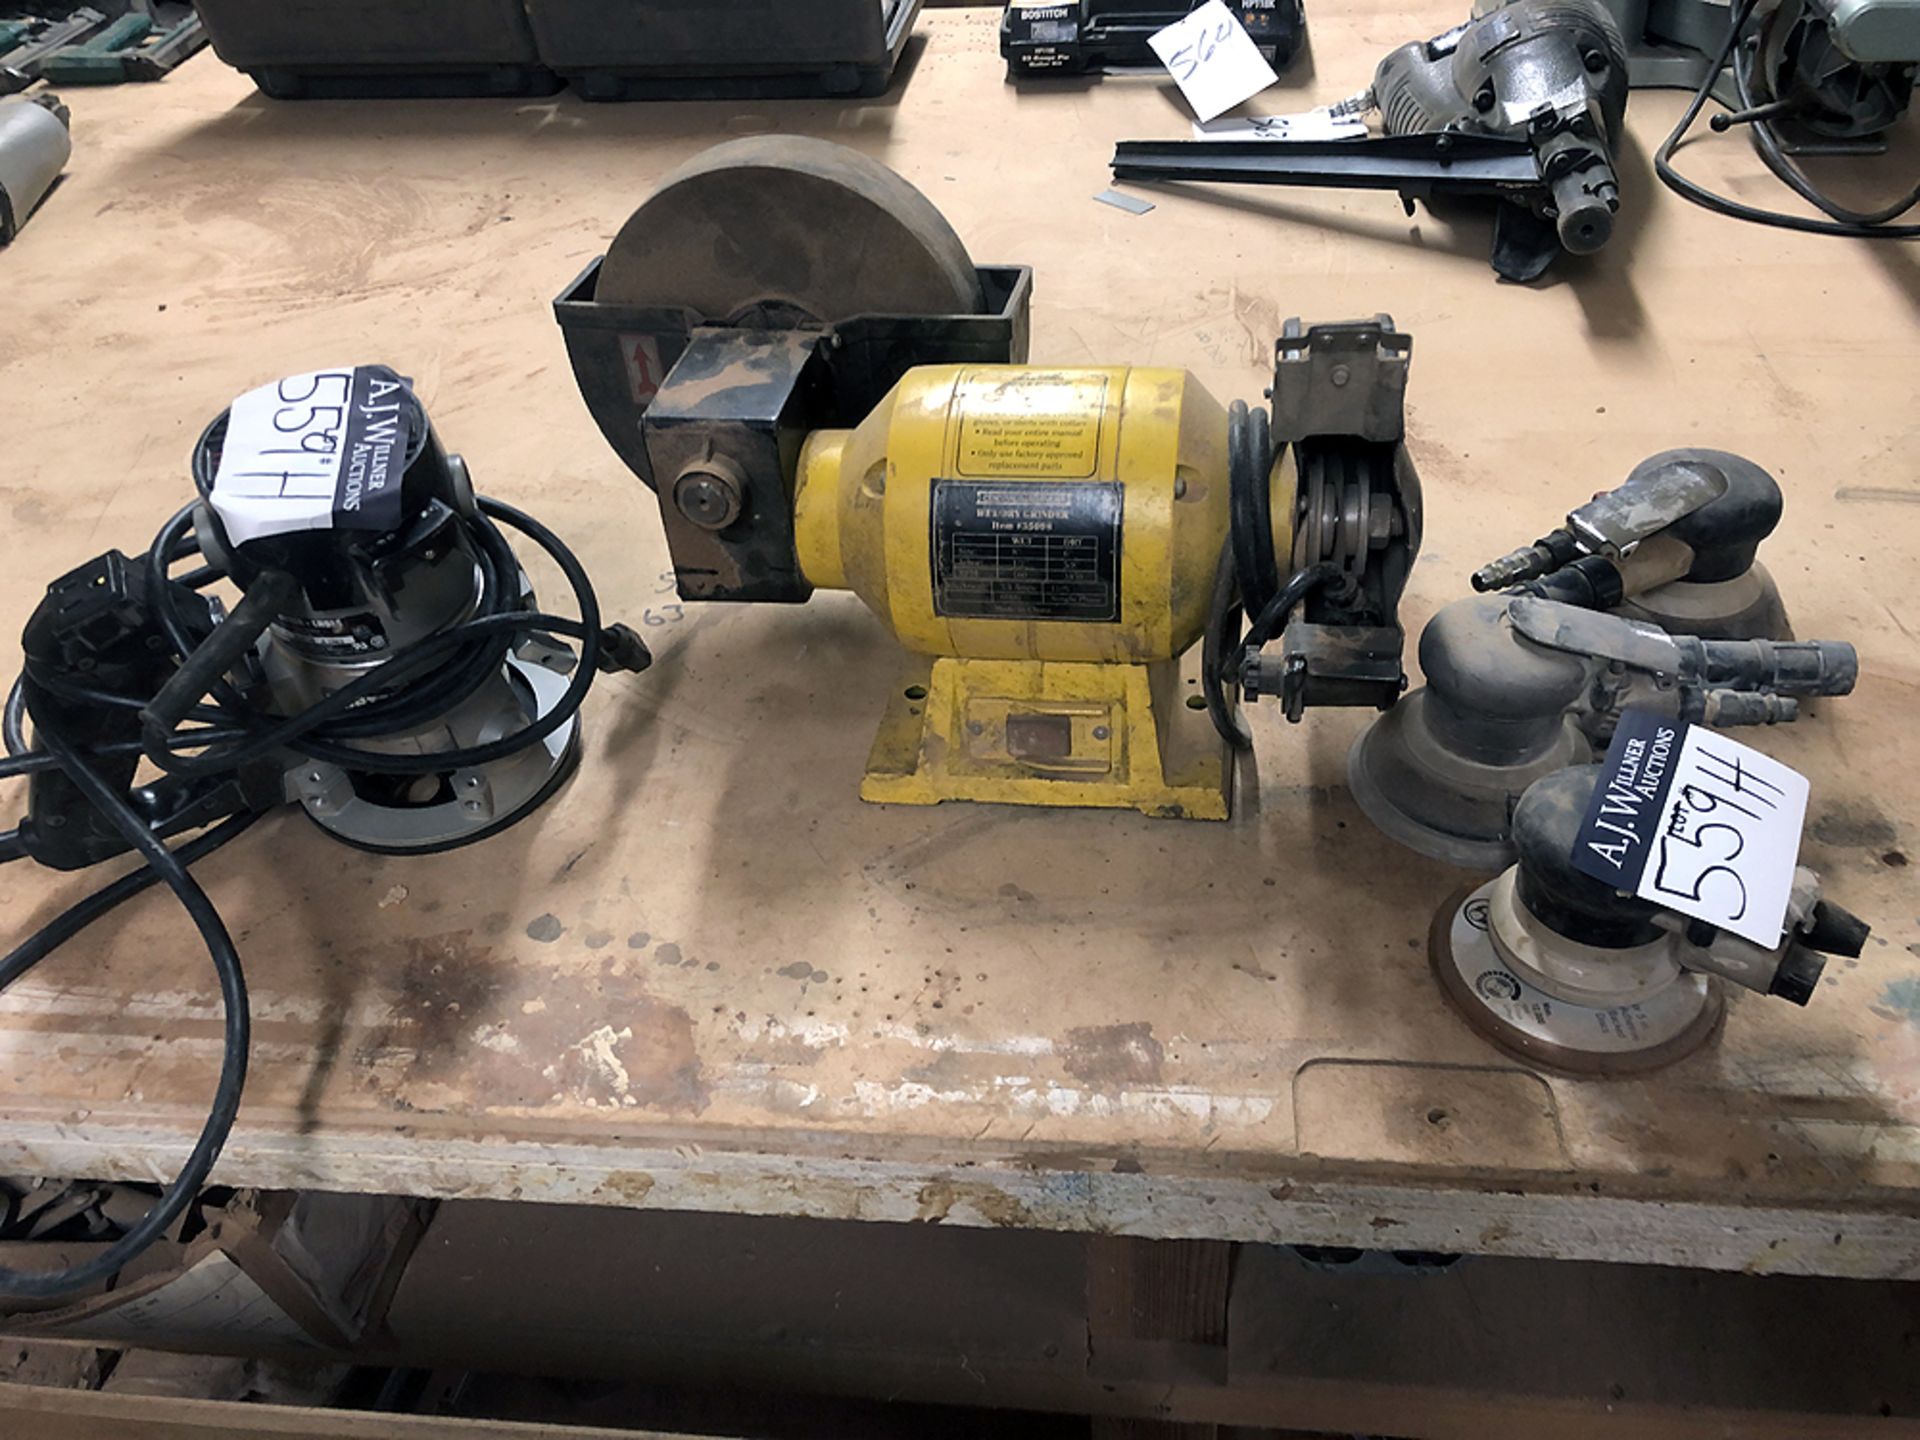 Tools: Grinder, Router & 3 Pnuematic Palm Sanders